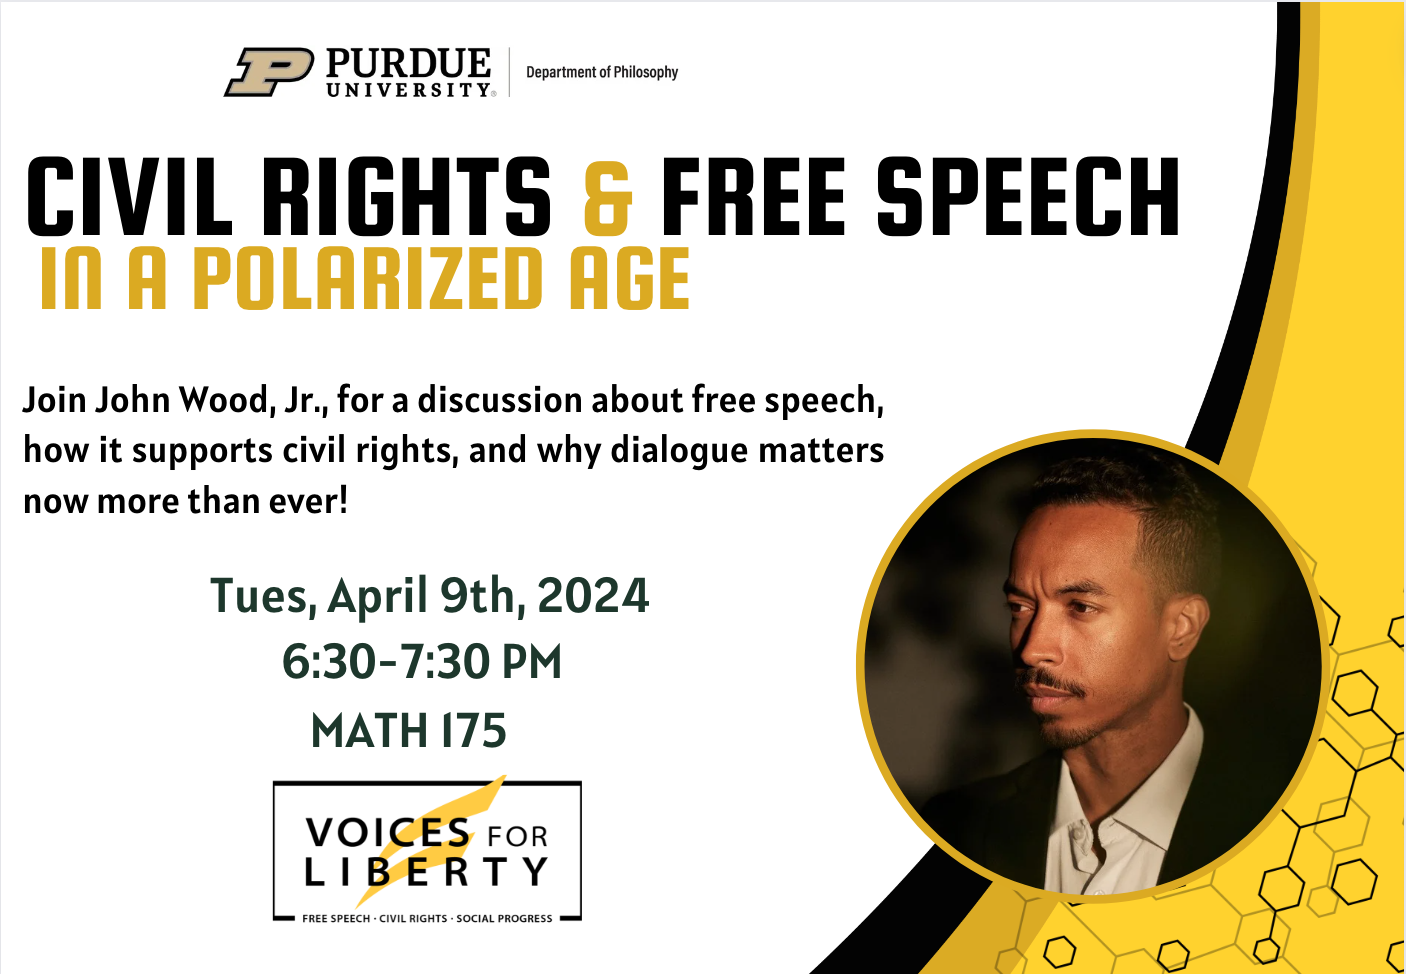 Civil Rights & Free Speech In a Polarized Age: Join John Wood, Jr., for a discussion about free speech, how it supports civil rights, and why dialogue matters now more than ever! Tues, April 9th, 2024, 6:30-7:30 PM, Math 175, Voices For Liberty: Free Speech, Civil Rights, Social Progress